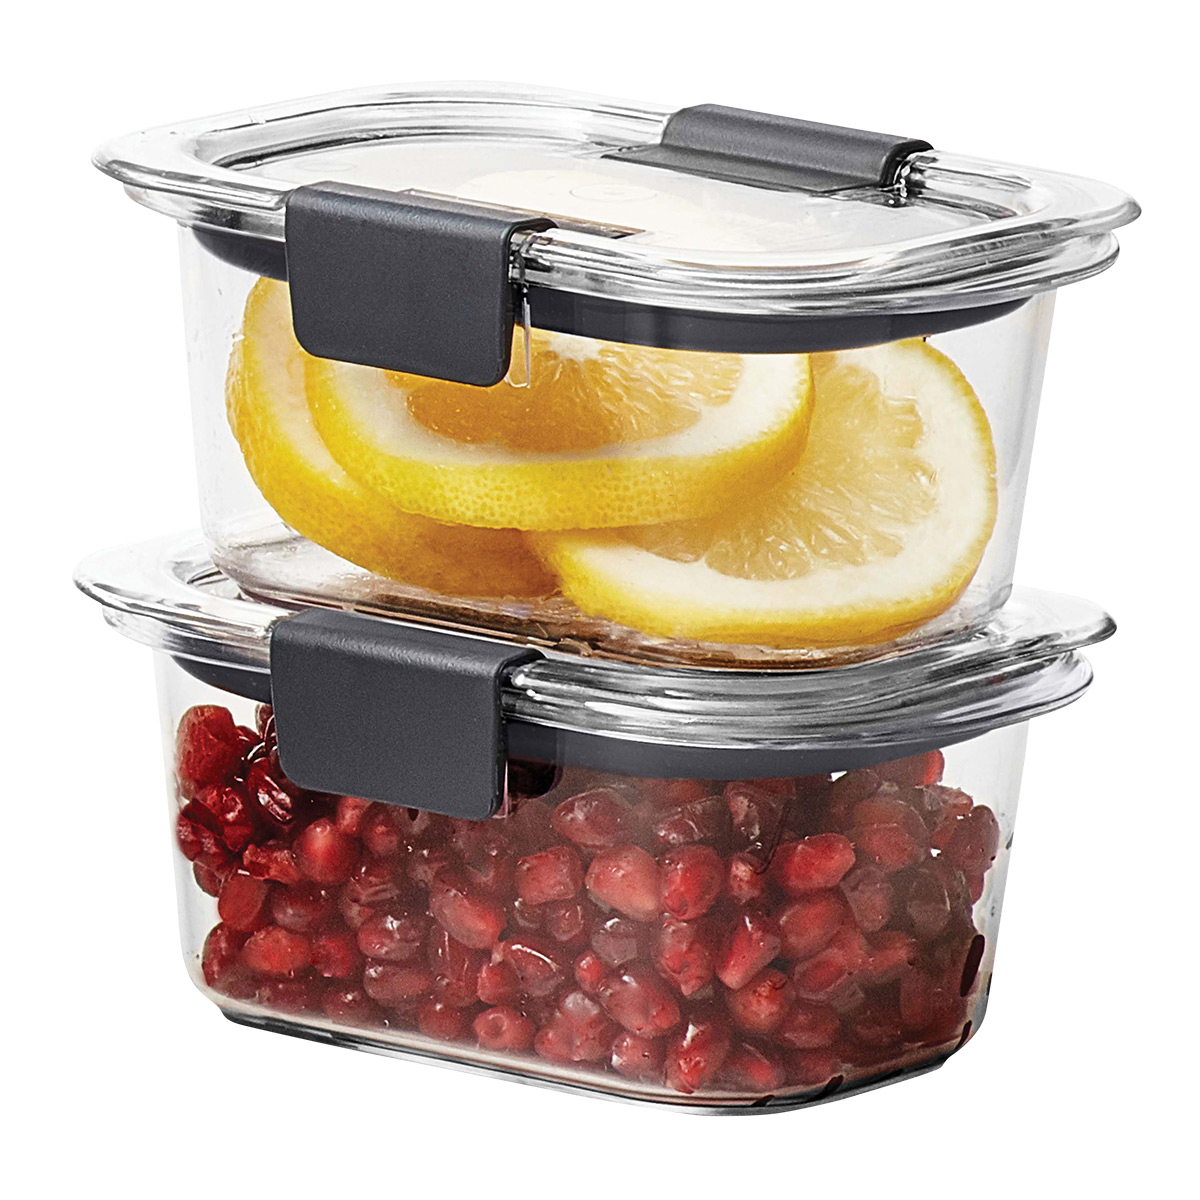 Rubbermaid Brilliance Food Storage Container, Medium, 3.2 Cup, 5 Pack,  Clear & Leak-Proof Brilliance Food Storage Set, 1.3 Cup Plastic Containers  with